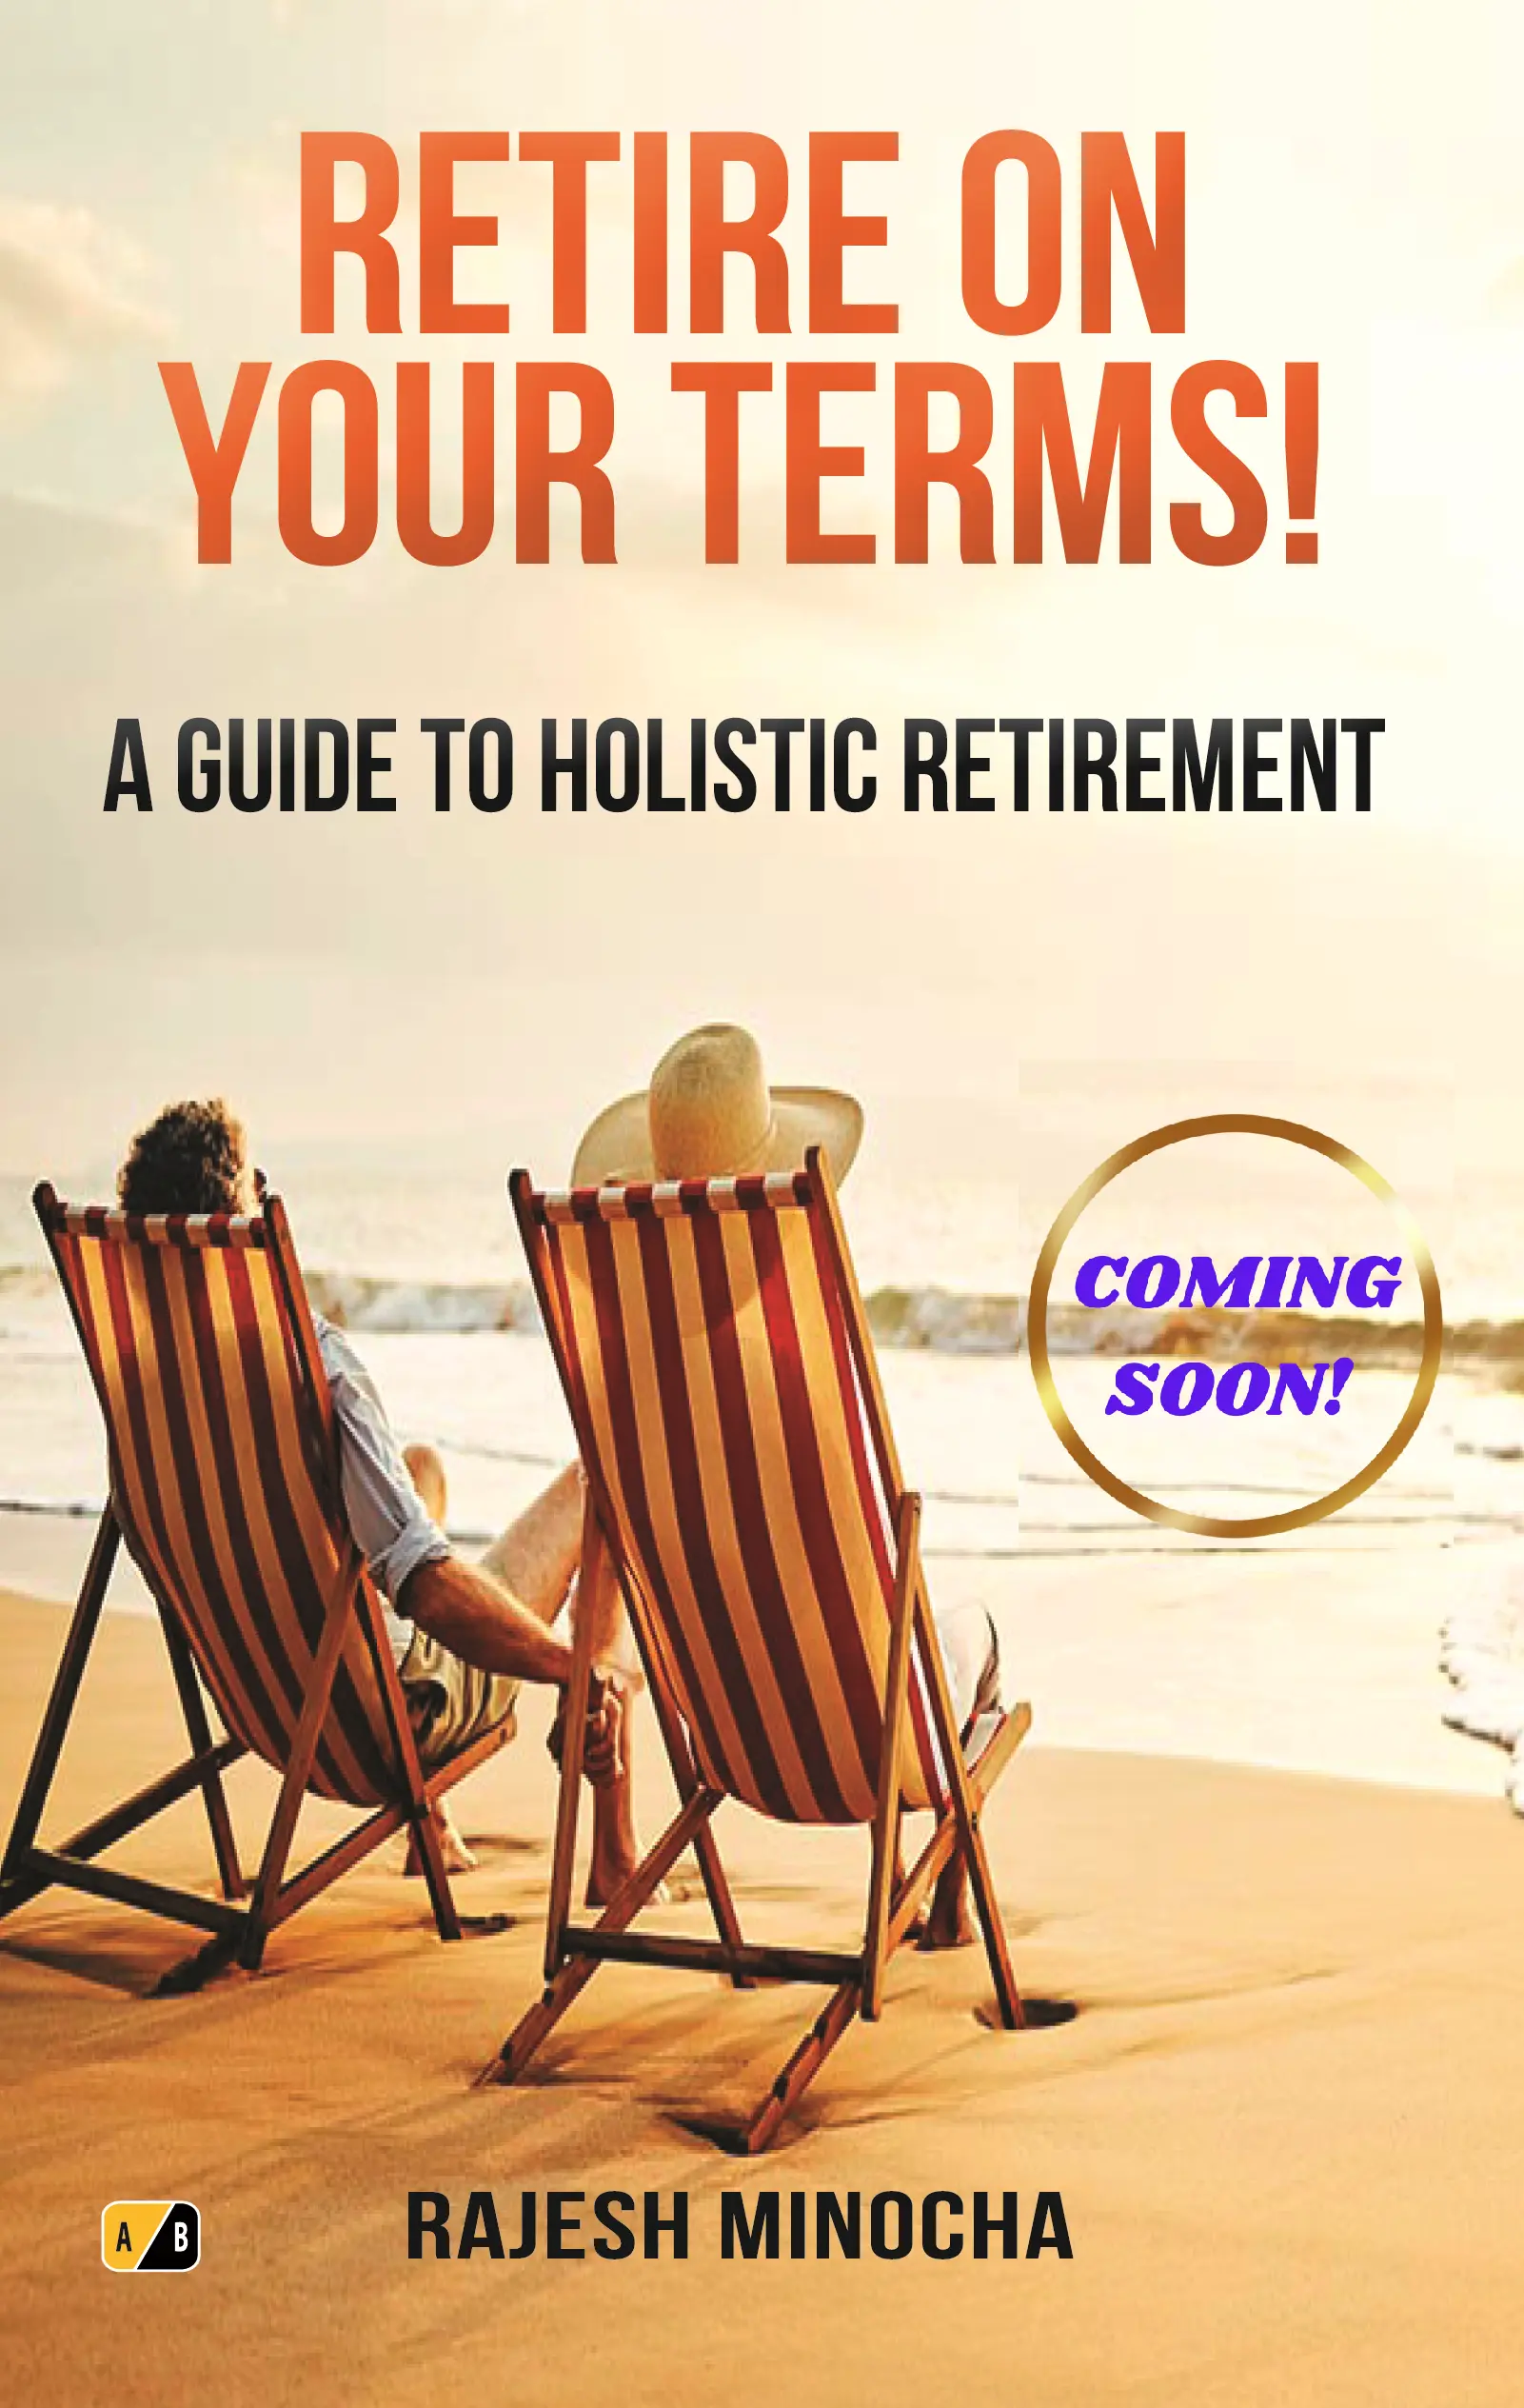 Book - Retire on your terms